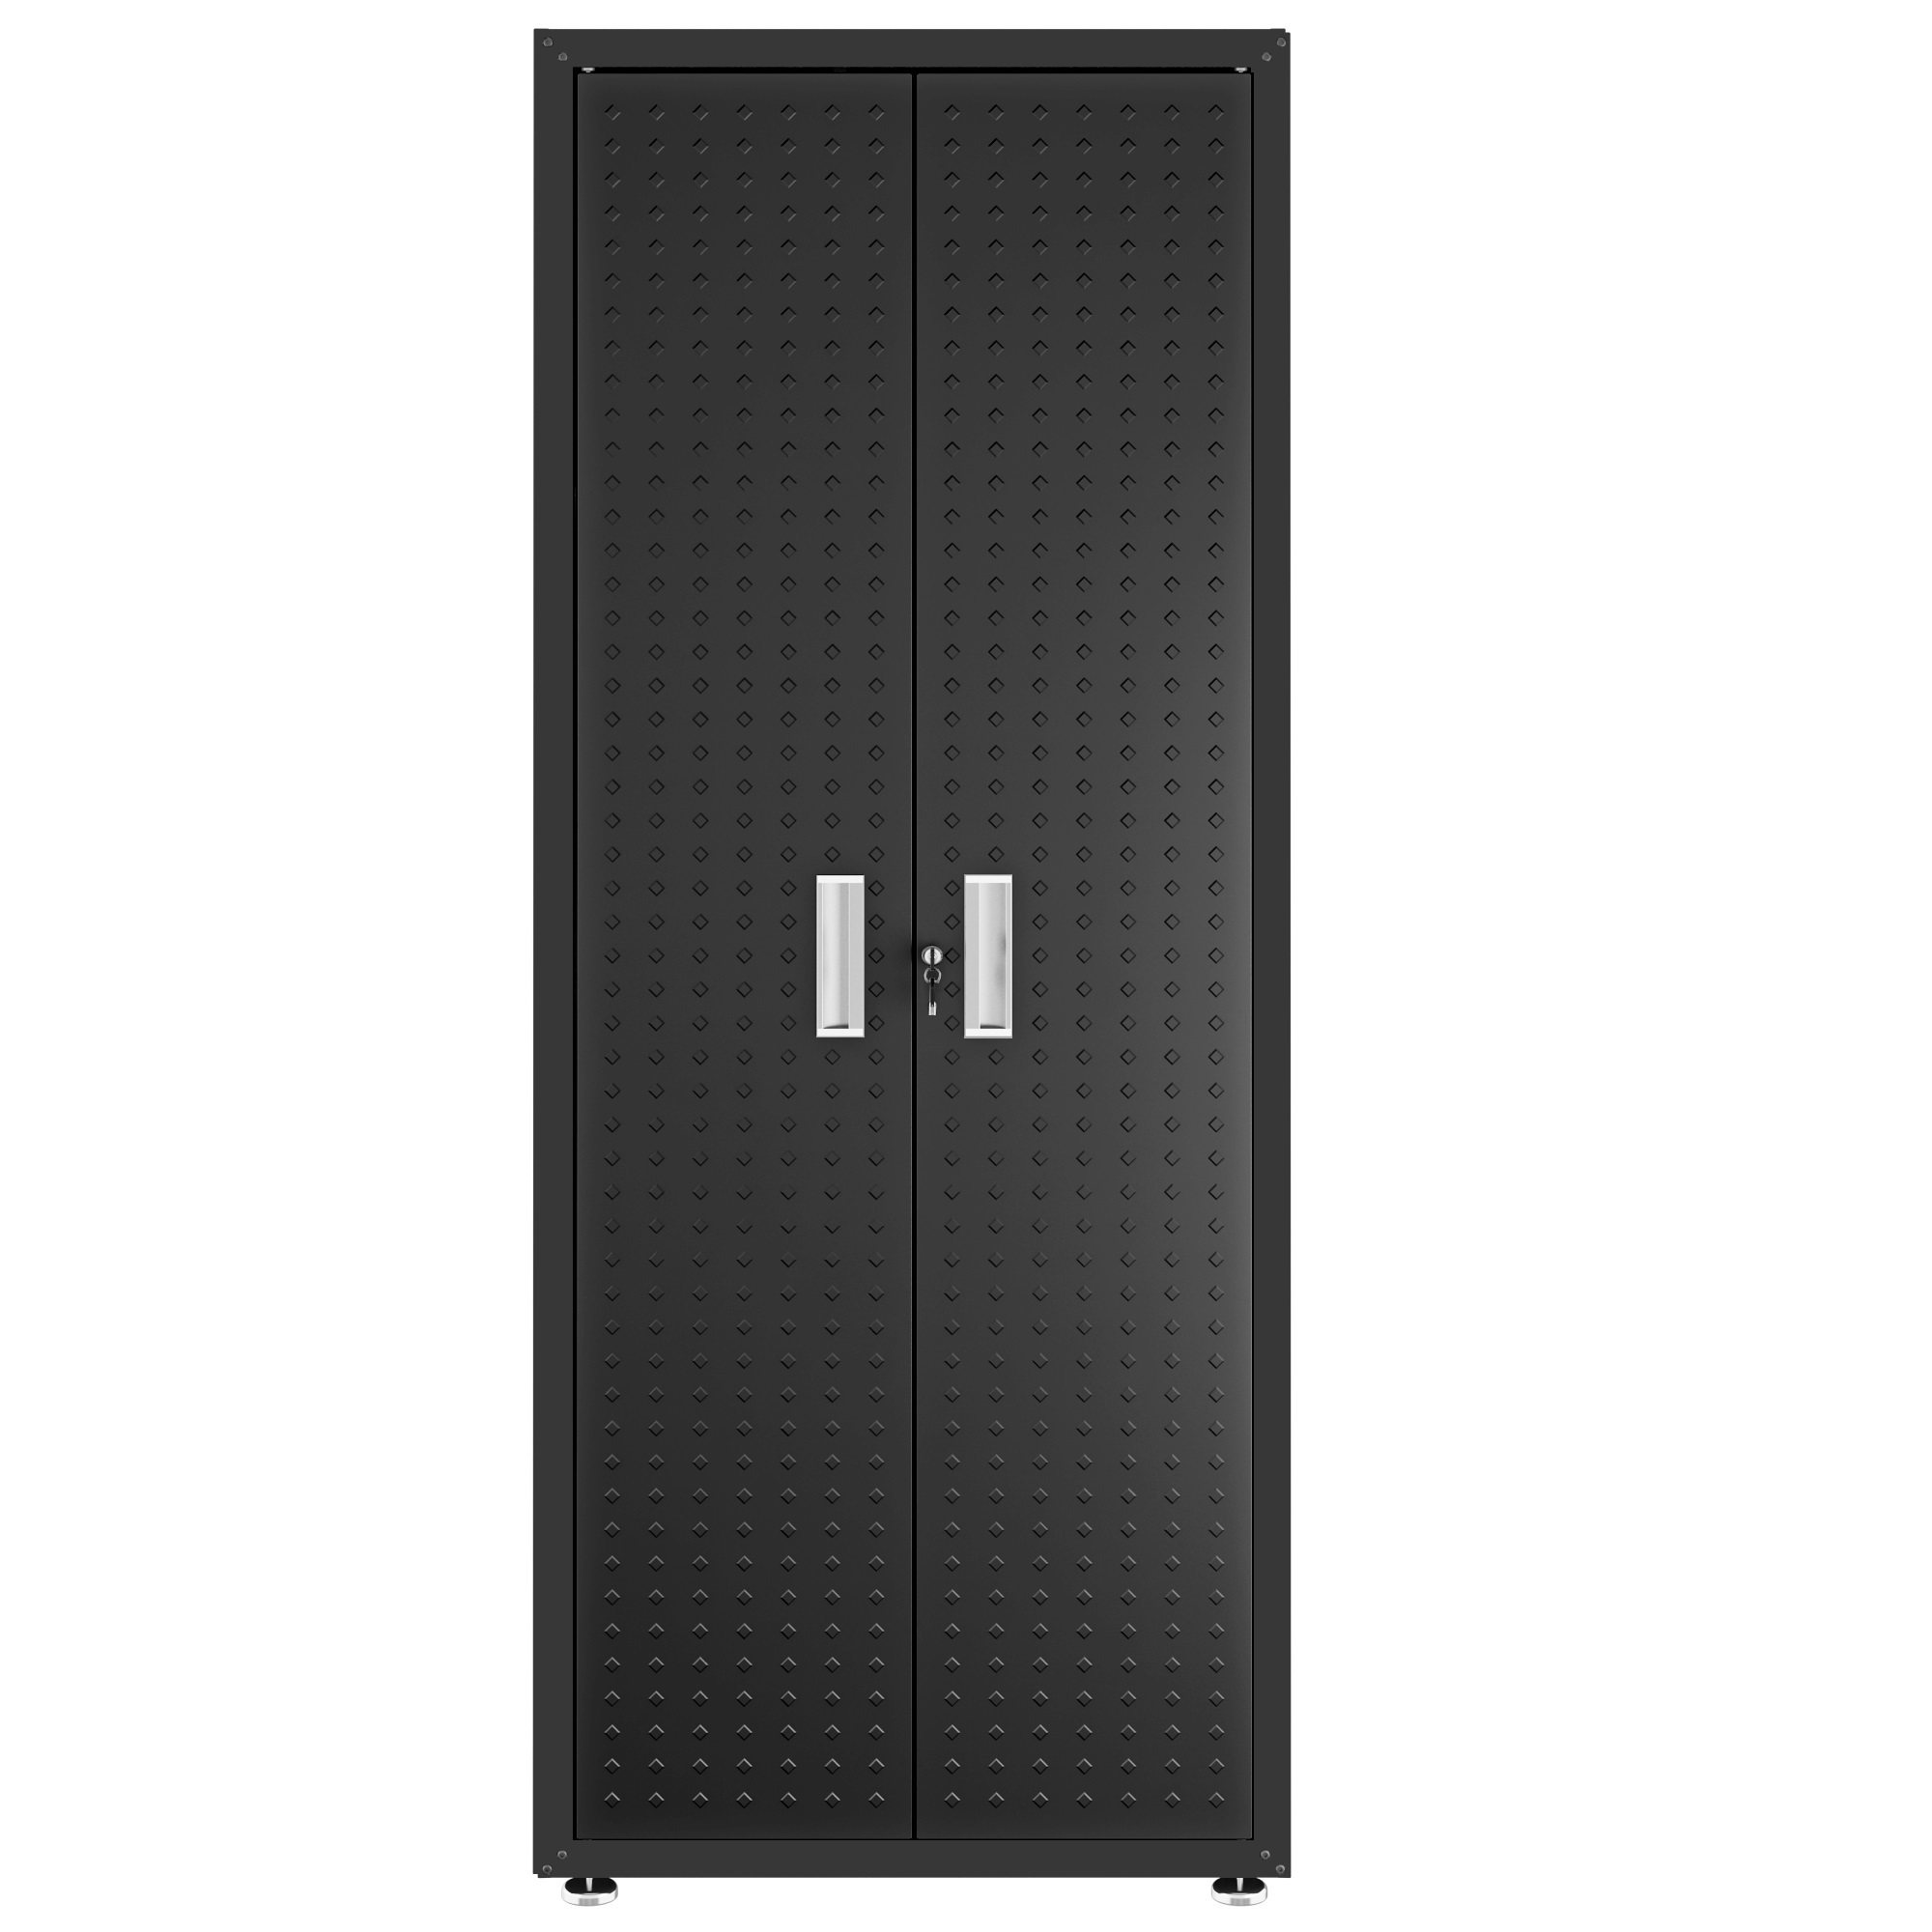 Manhattan Comfort, Fortress Tall Garage Cabinet in Charcoal Grey, Height 74.8 in, Width 30.3 in, Color Dark Gray, Model 1GMCF